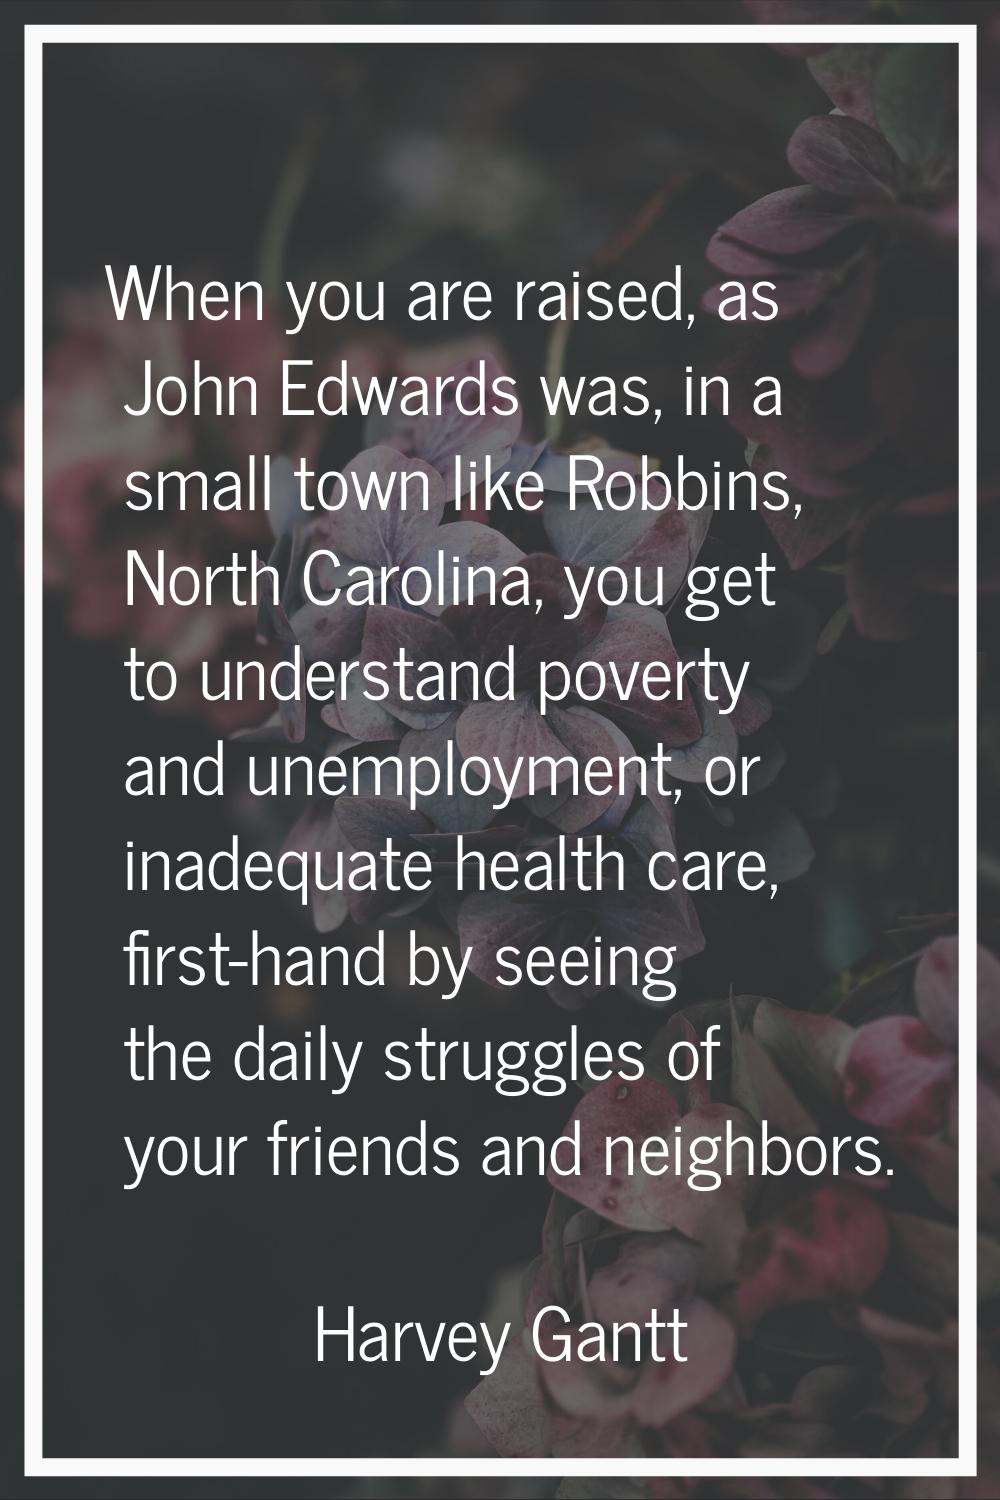 When you are raised, as John Edwards was, in a small town like Robbins, North Carolina, you get to 